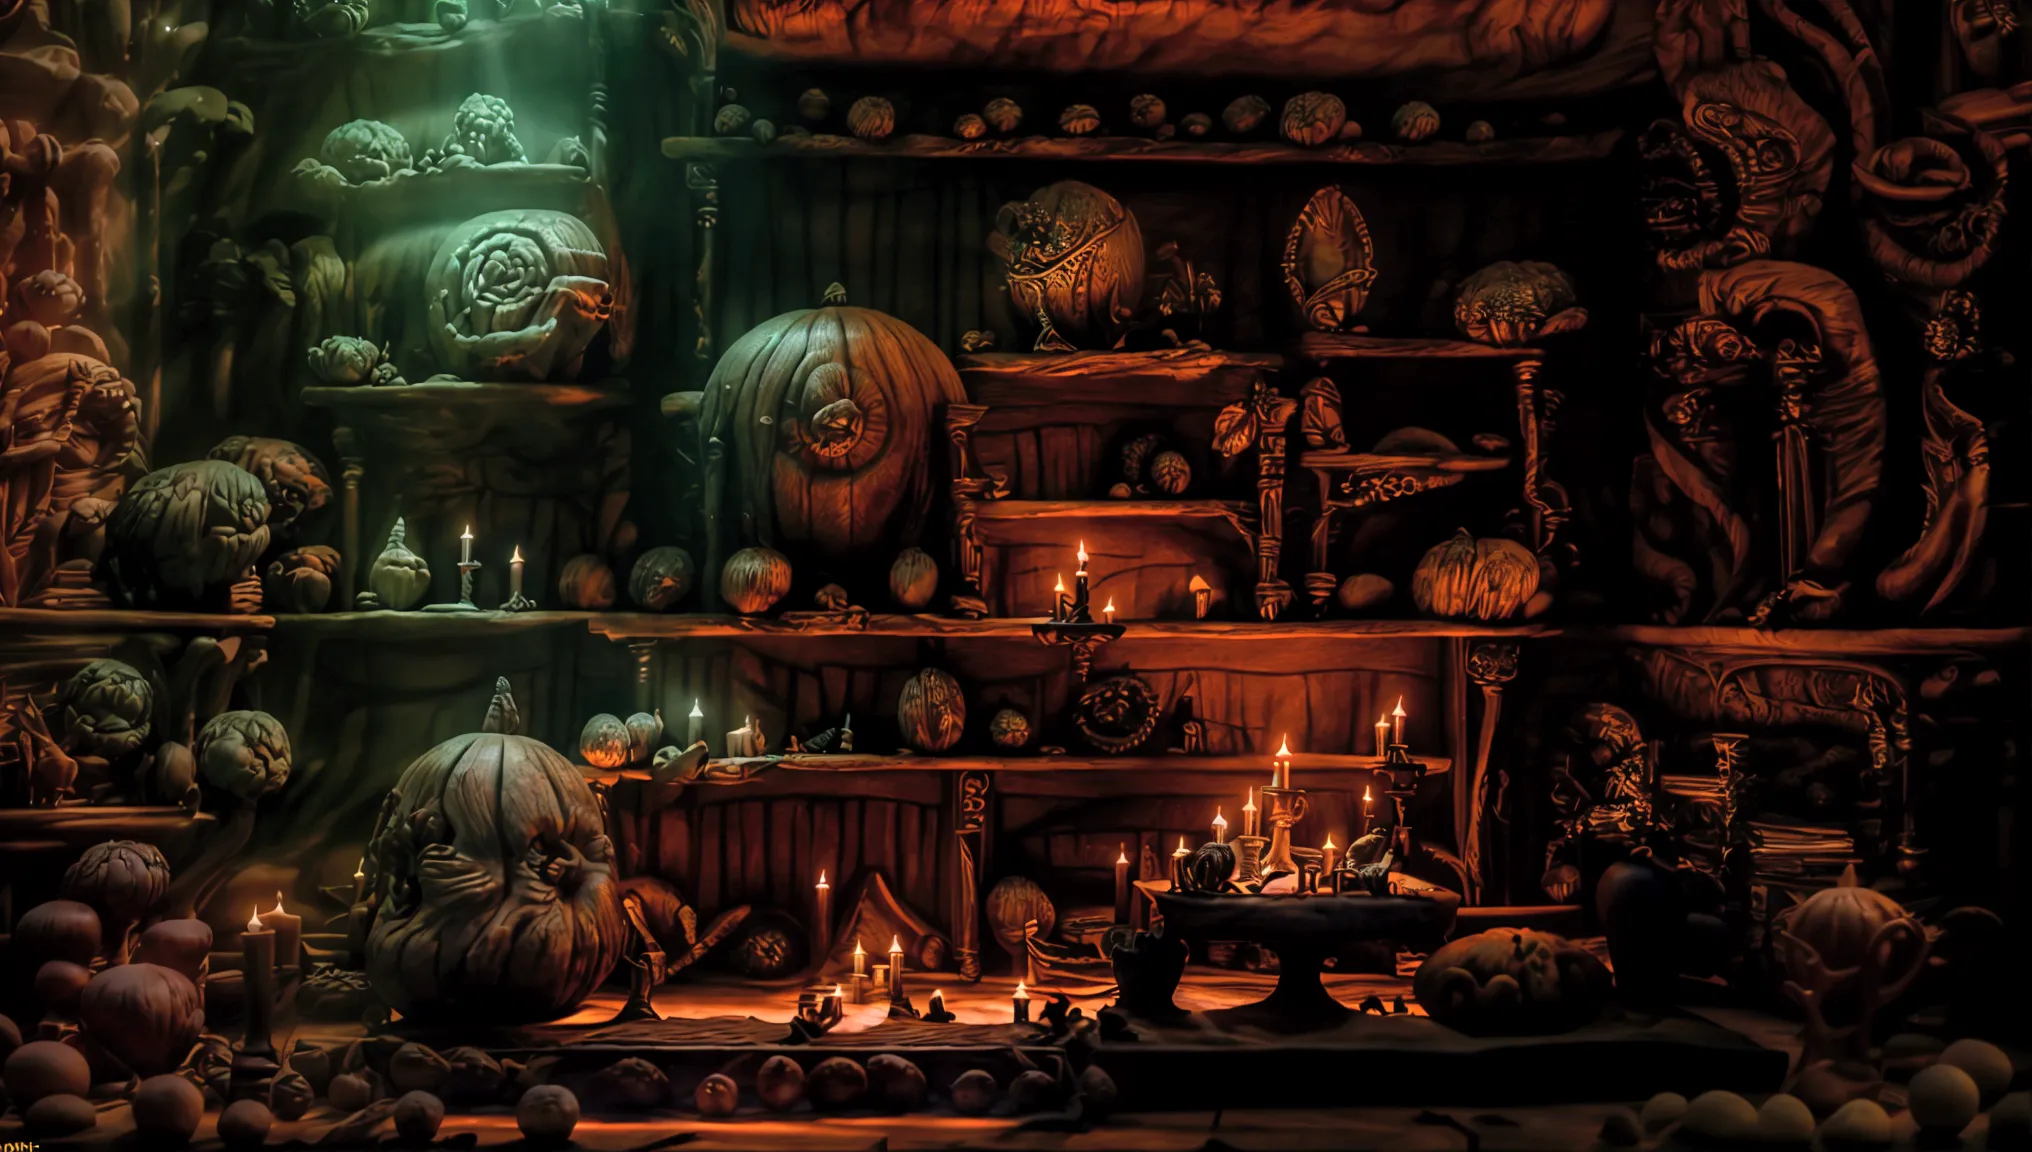 A fantasy library interior, intricate ornate bookshelves, ancient tomes, glowing magic orbs, candles, dramatic lighting, moody a...